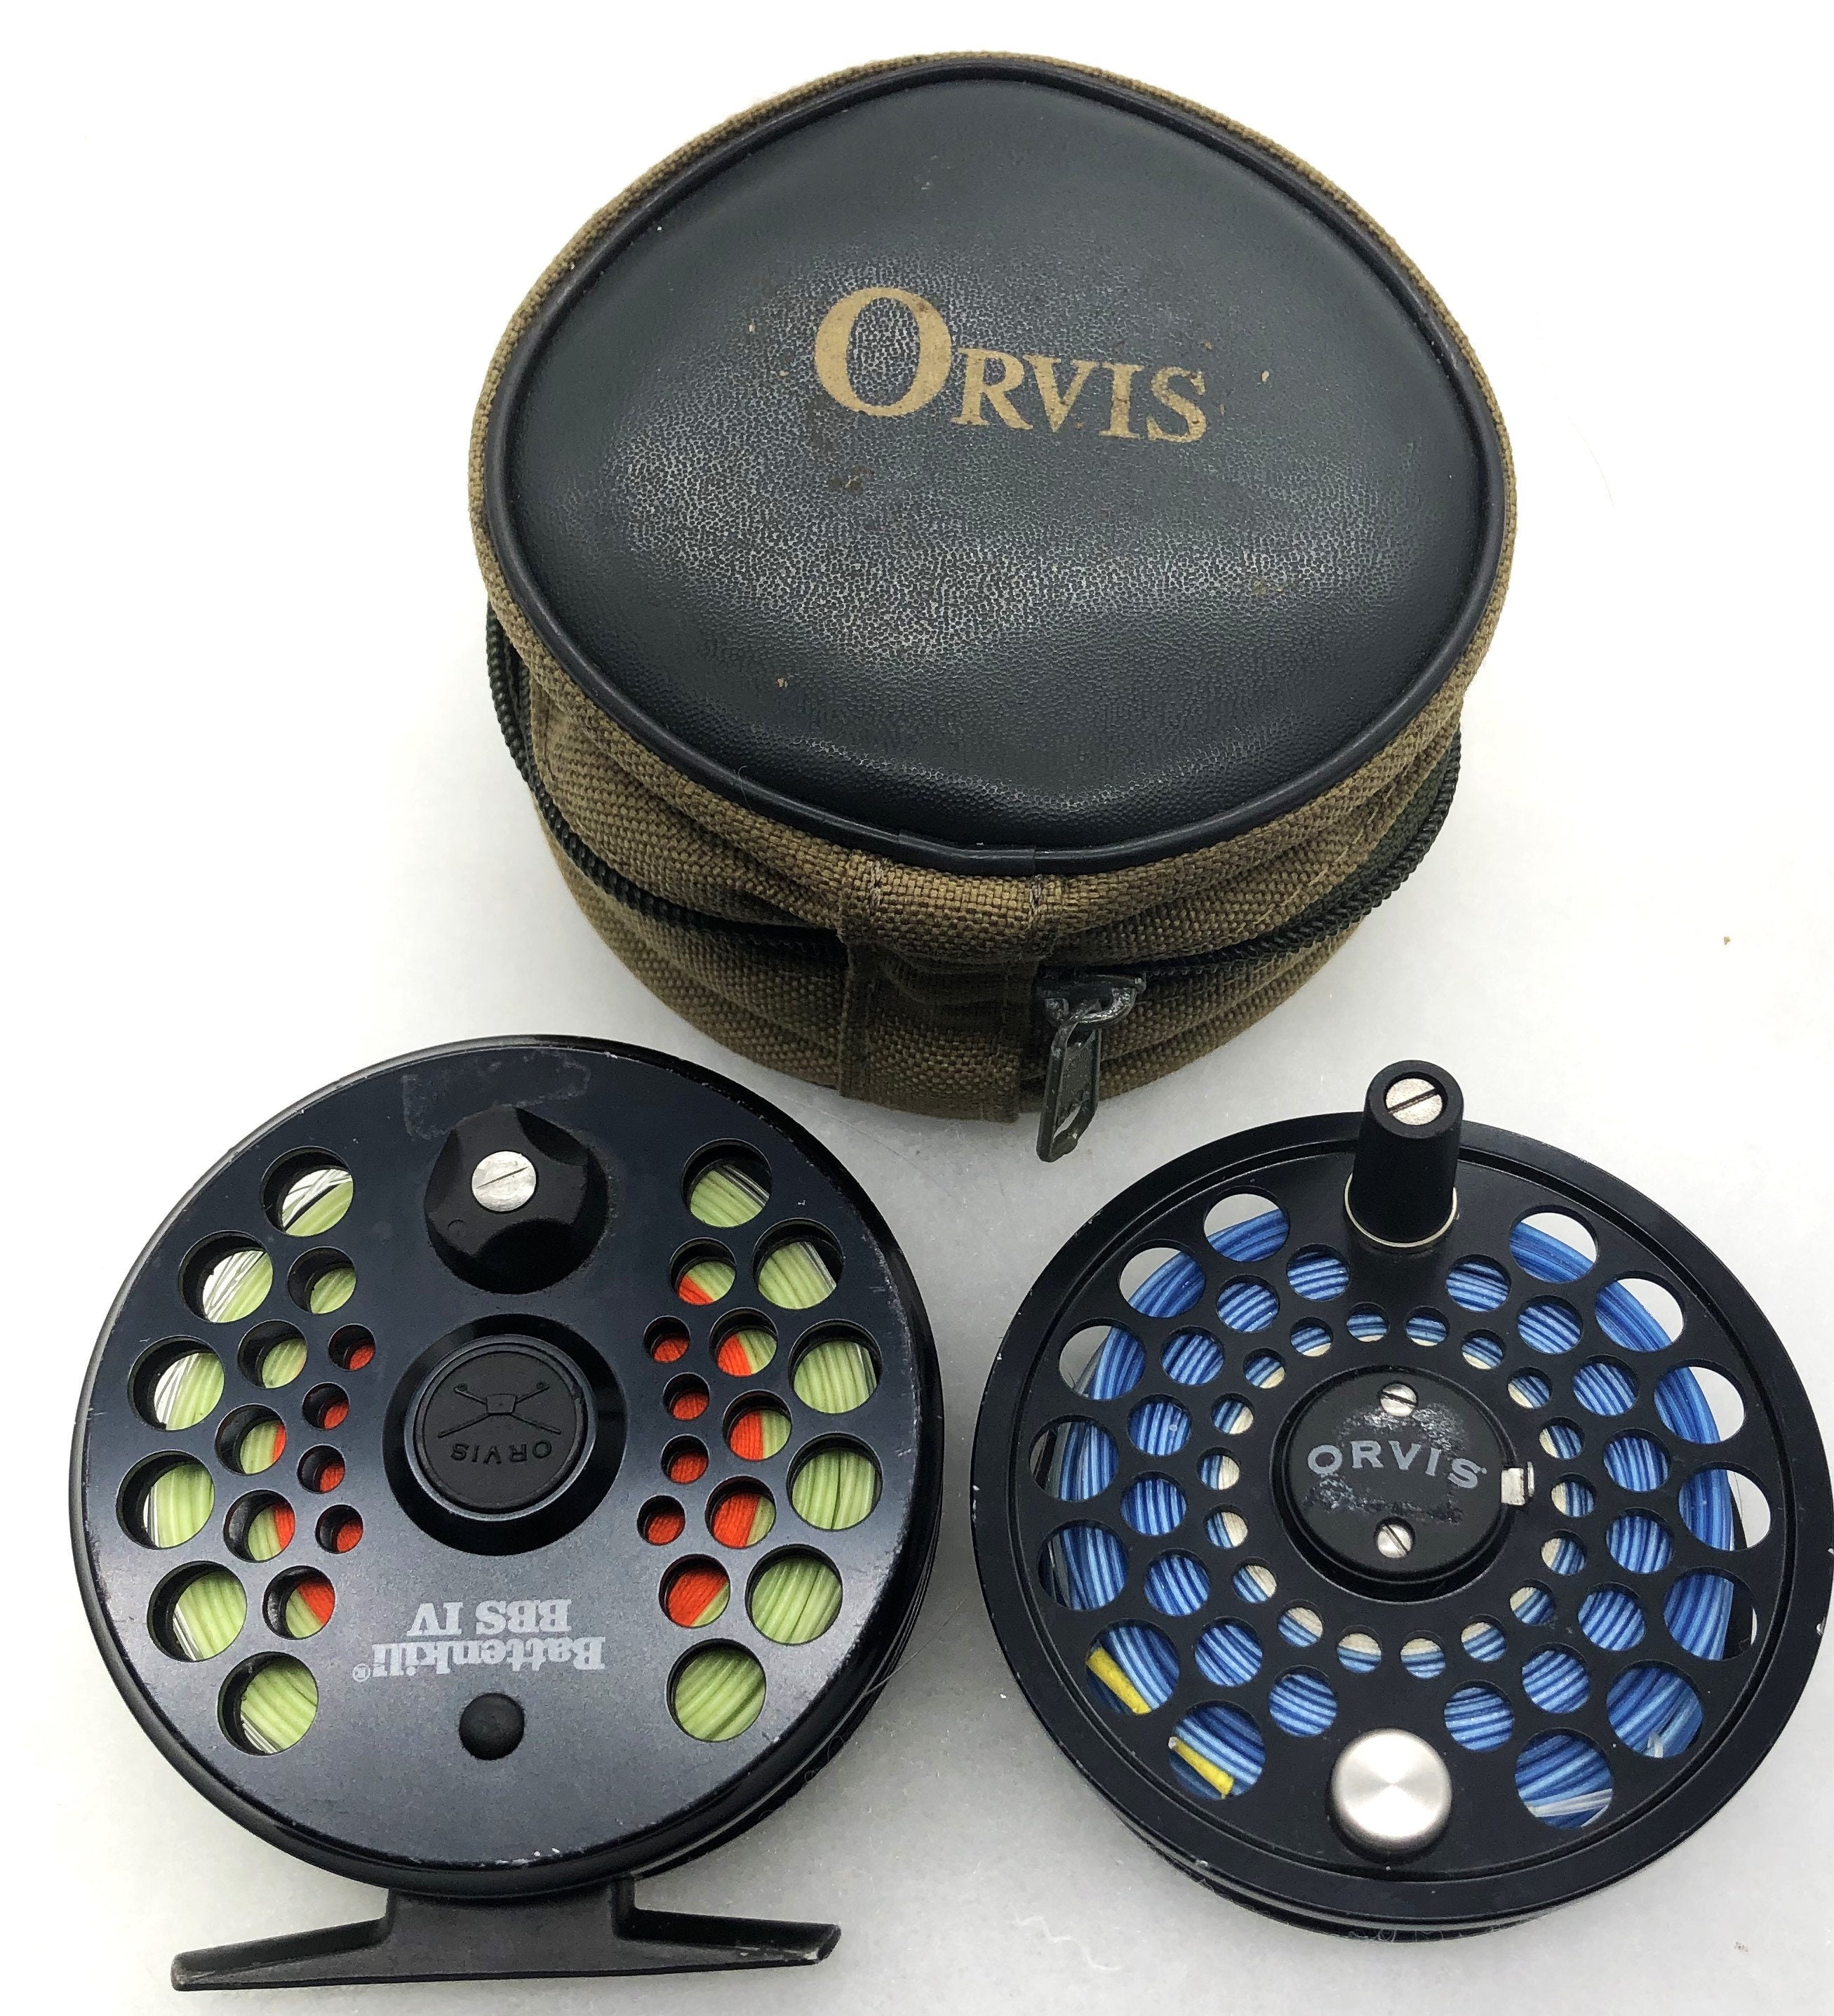 Orvis Battenkill BBS IV Fly Fishing Reel with Spare Spool / Case